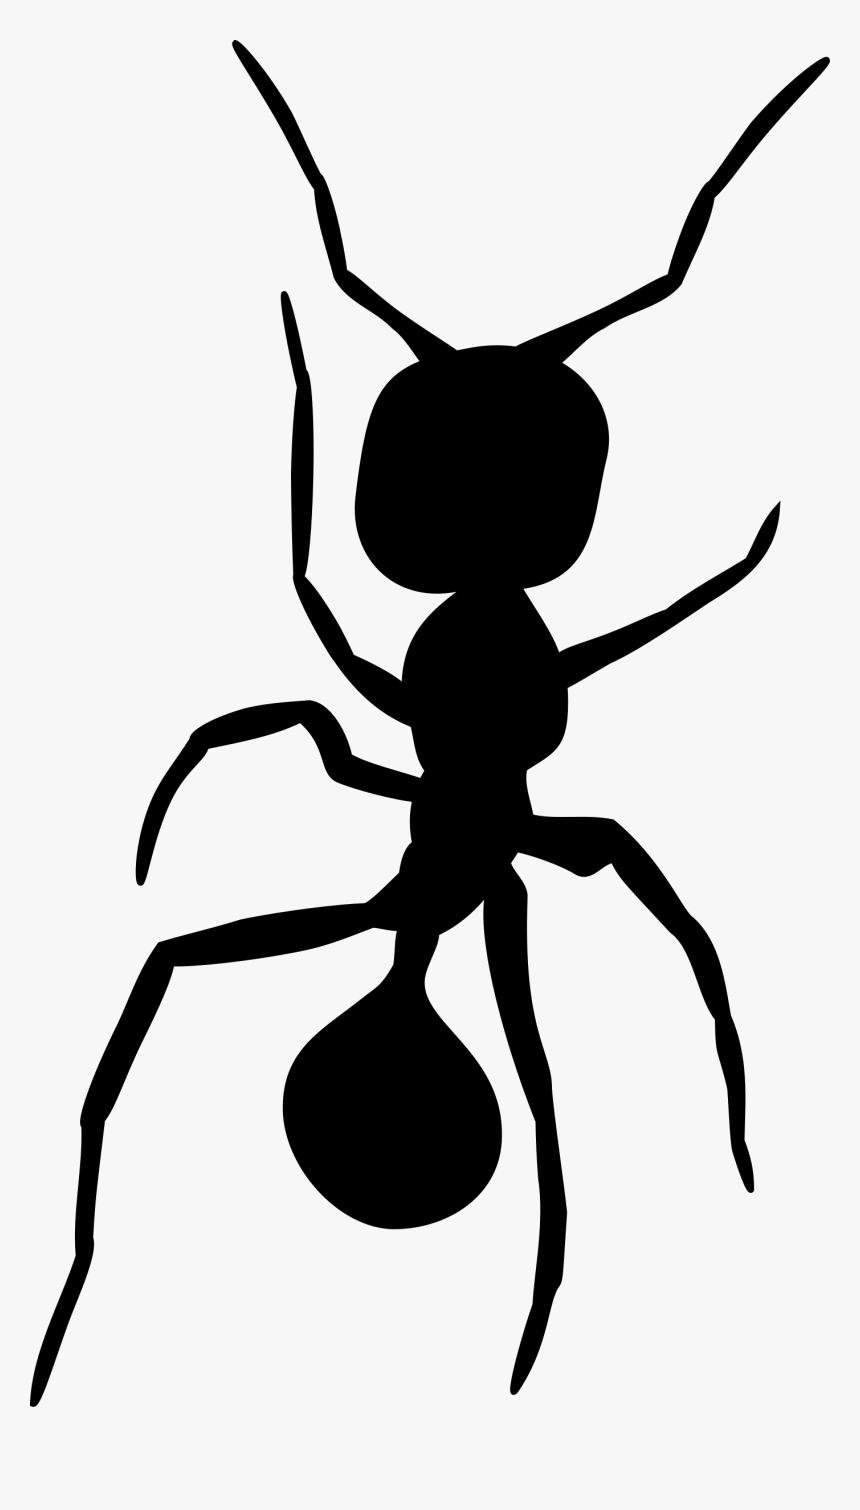 Transparent Ant Clip Art - Silhouette Ant Png, Png Download, Free Download